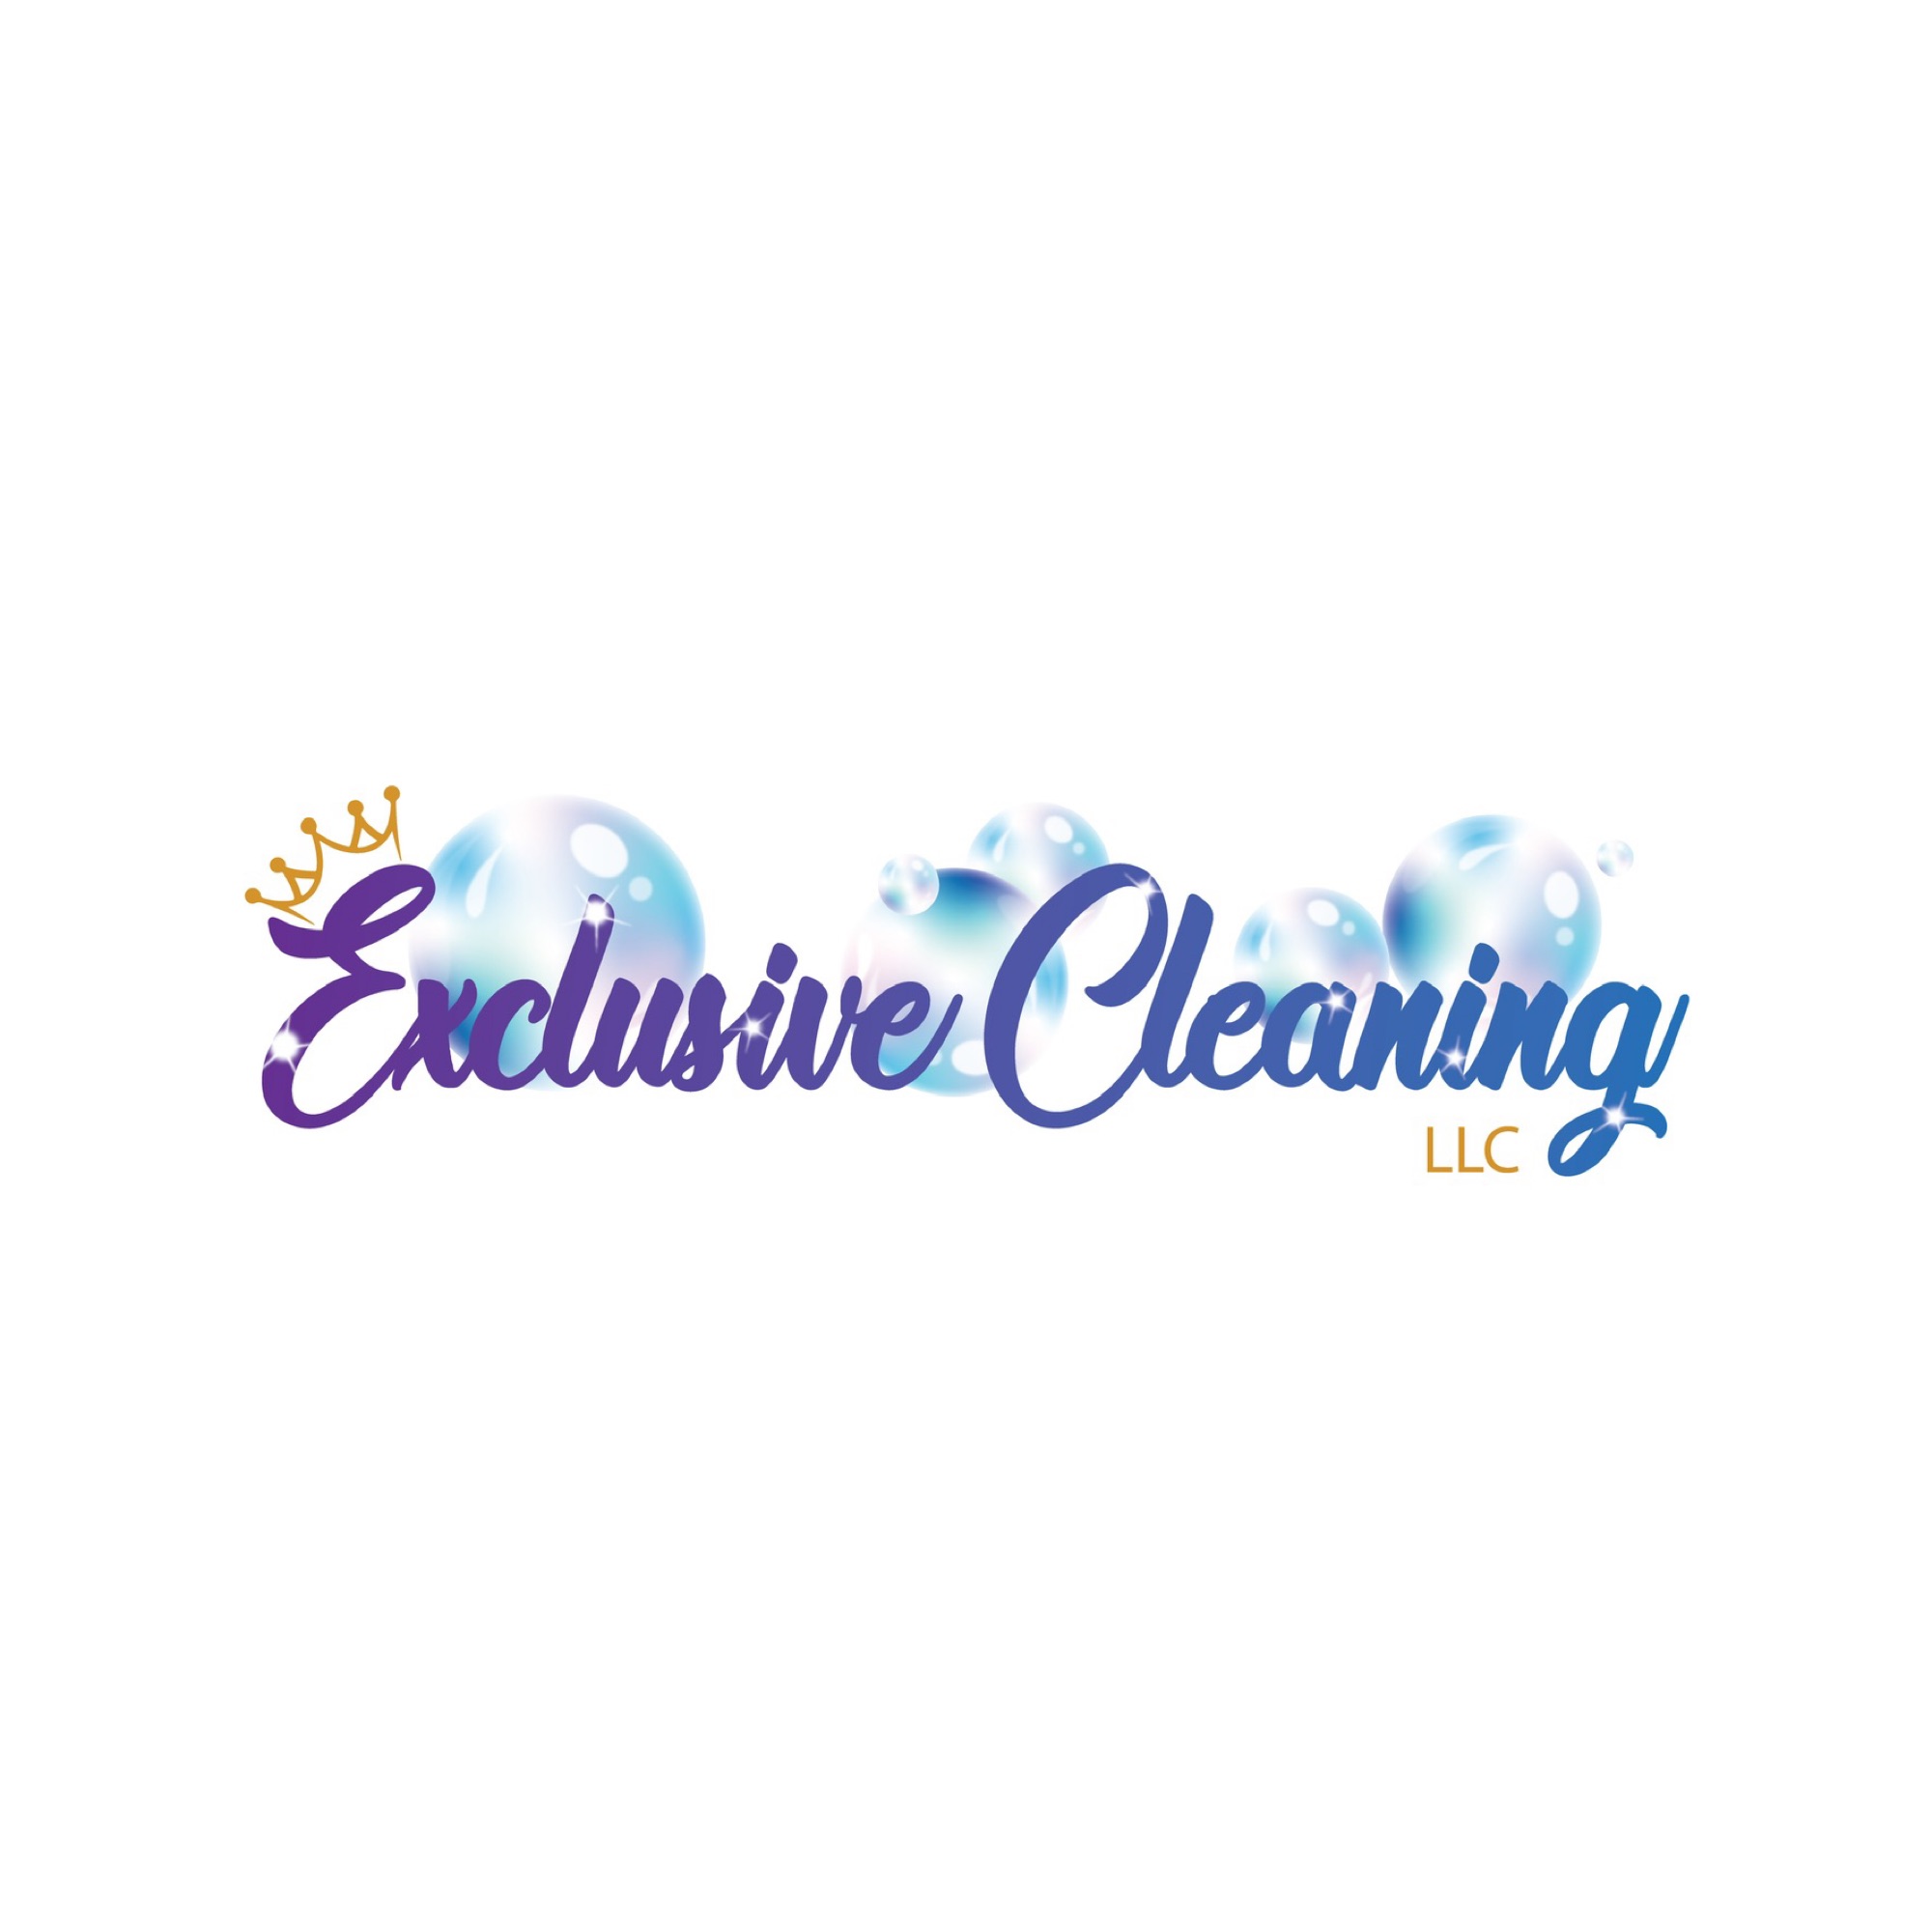 Exclusive Cleaning, LLC Logo